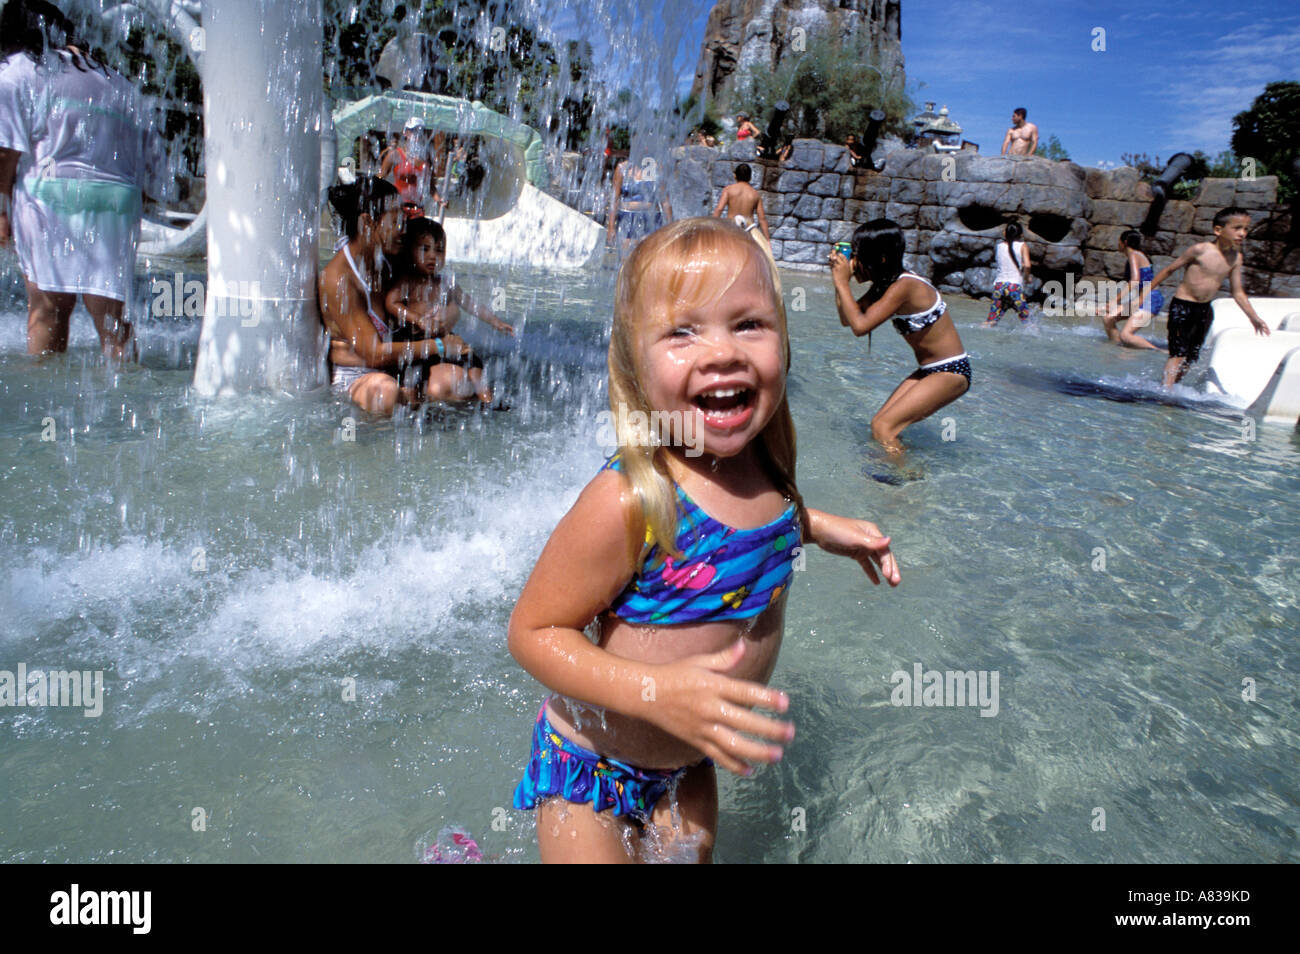 Girl at Six Flags Hurricane Harbor Los Angeles County California United States of America Stock Photo